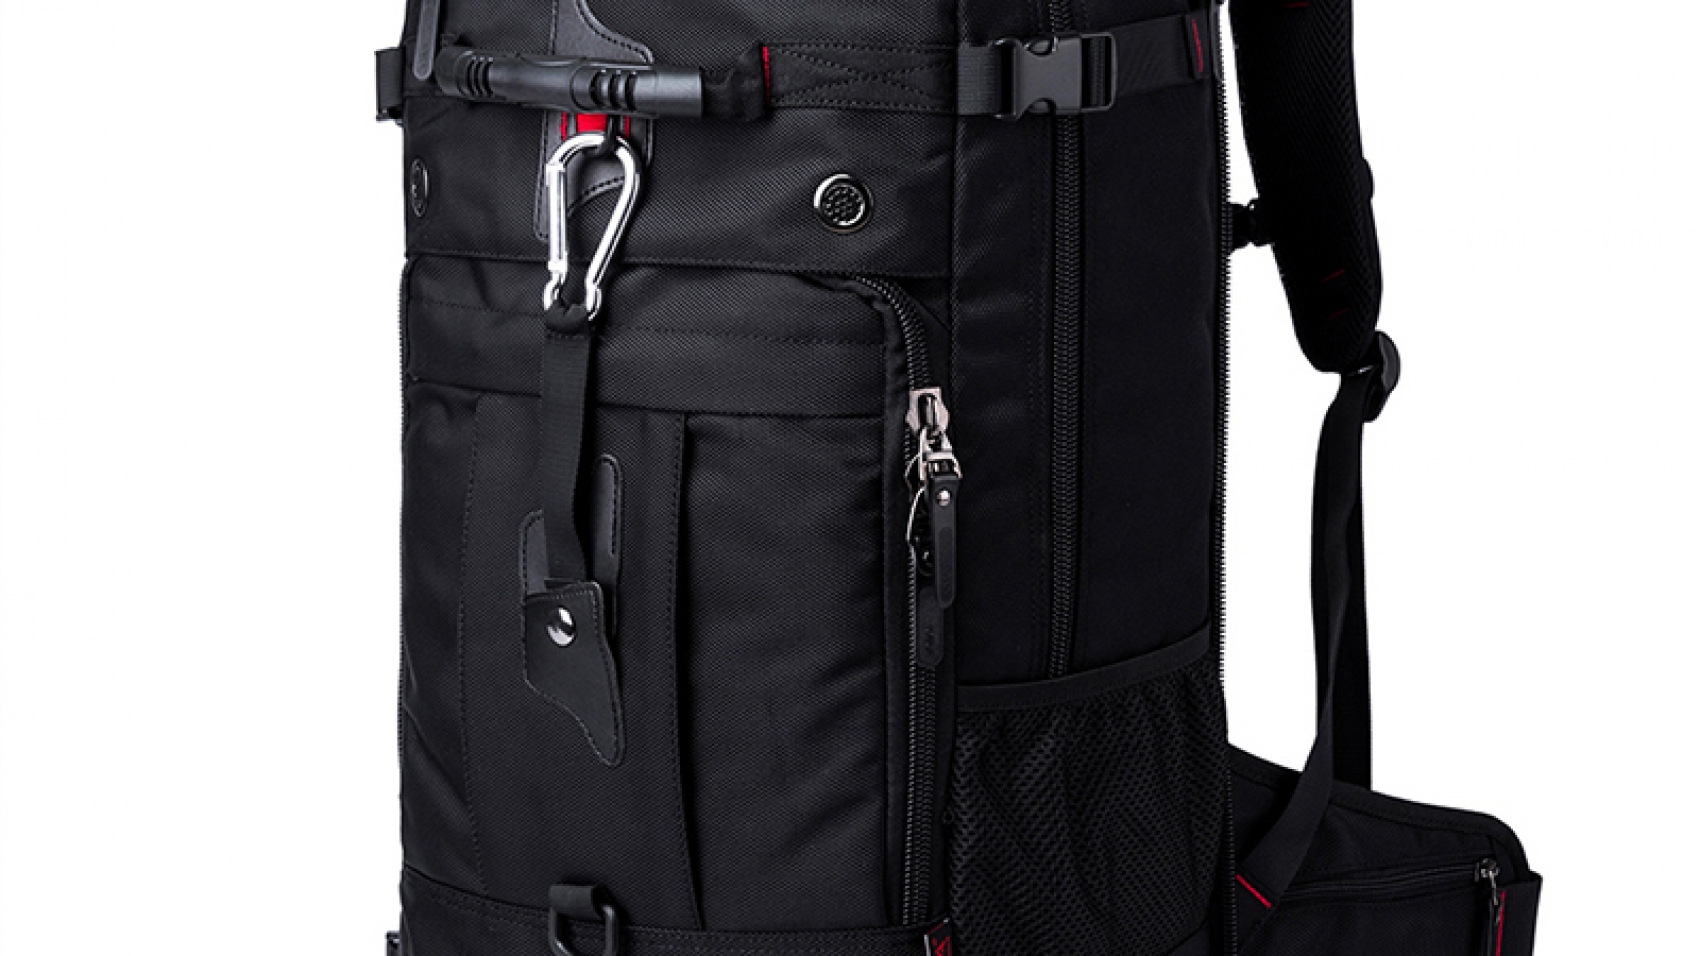 Large capacity travel computer backpack